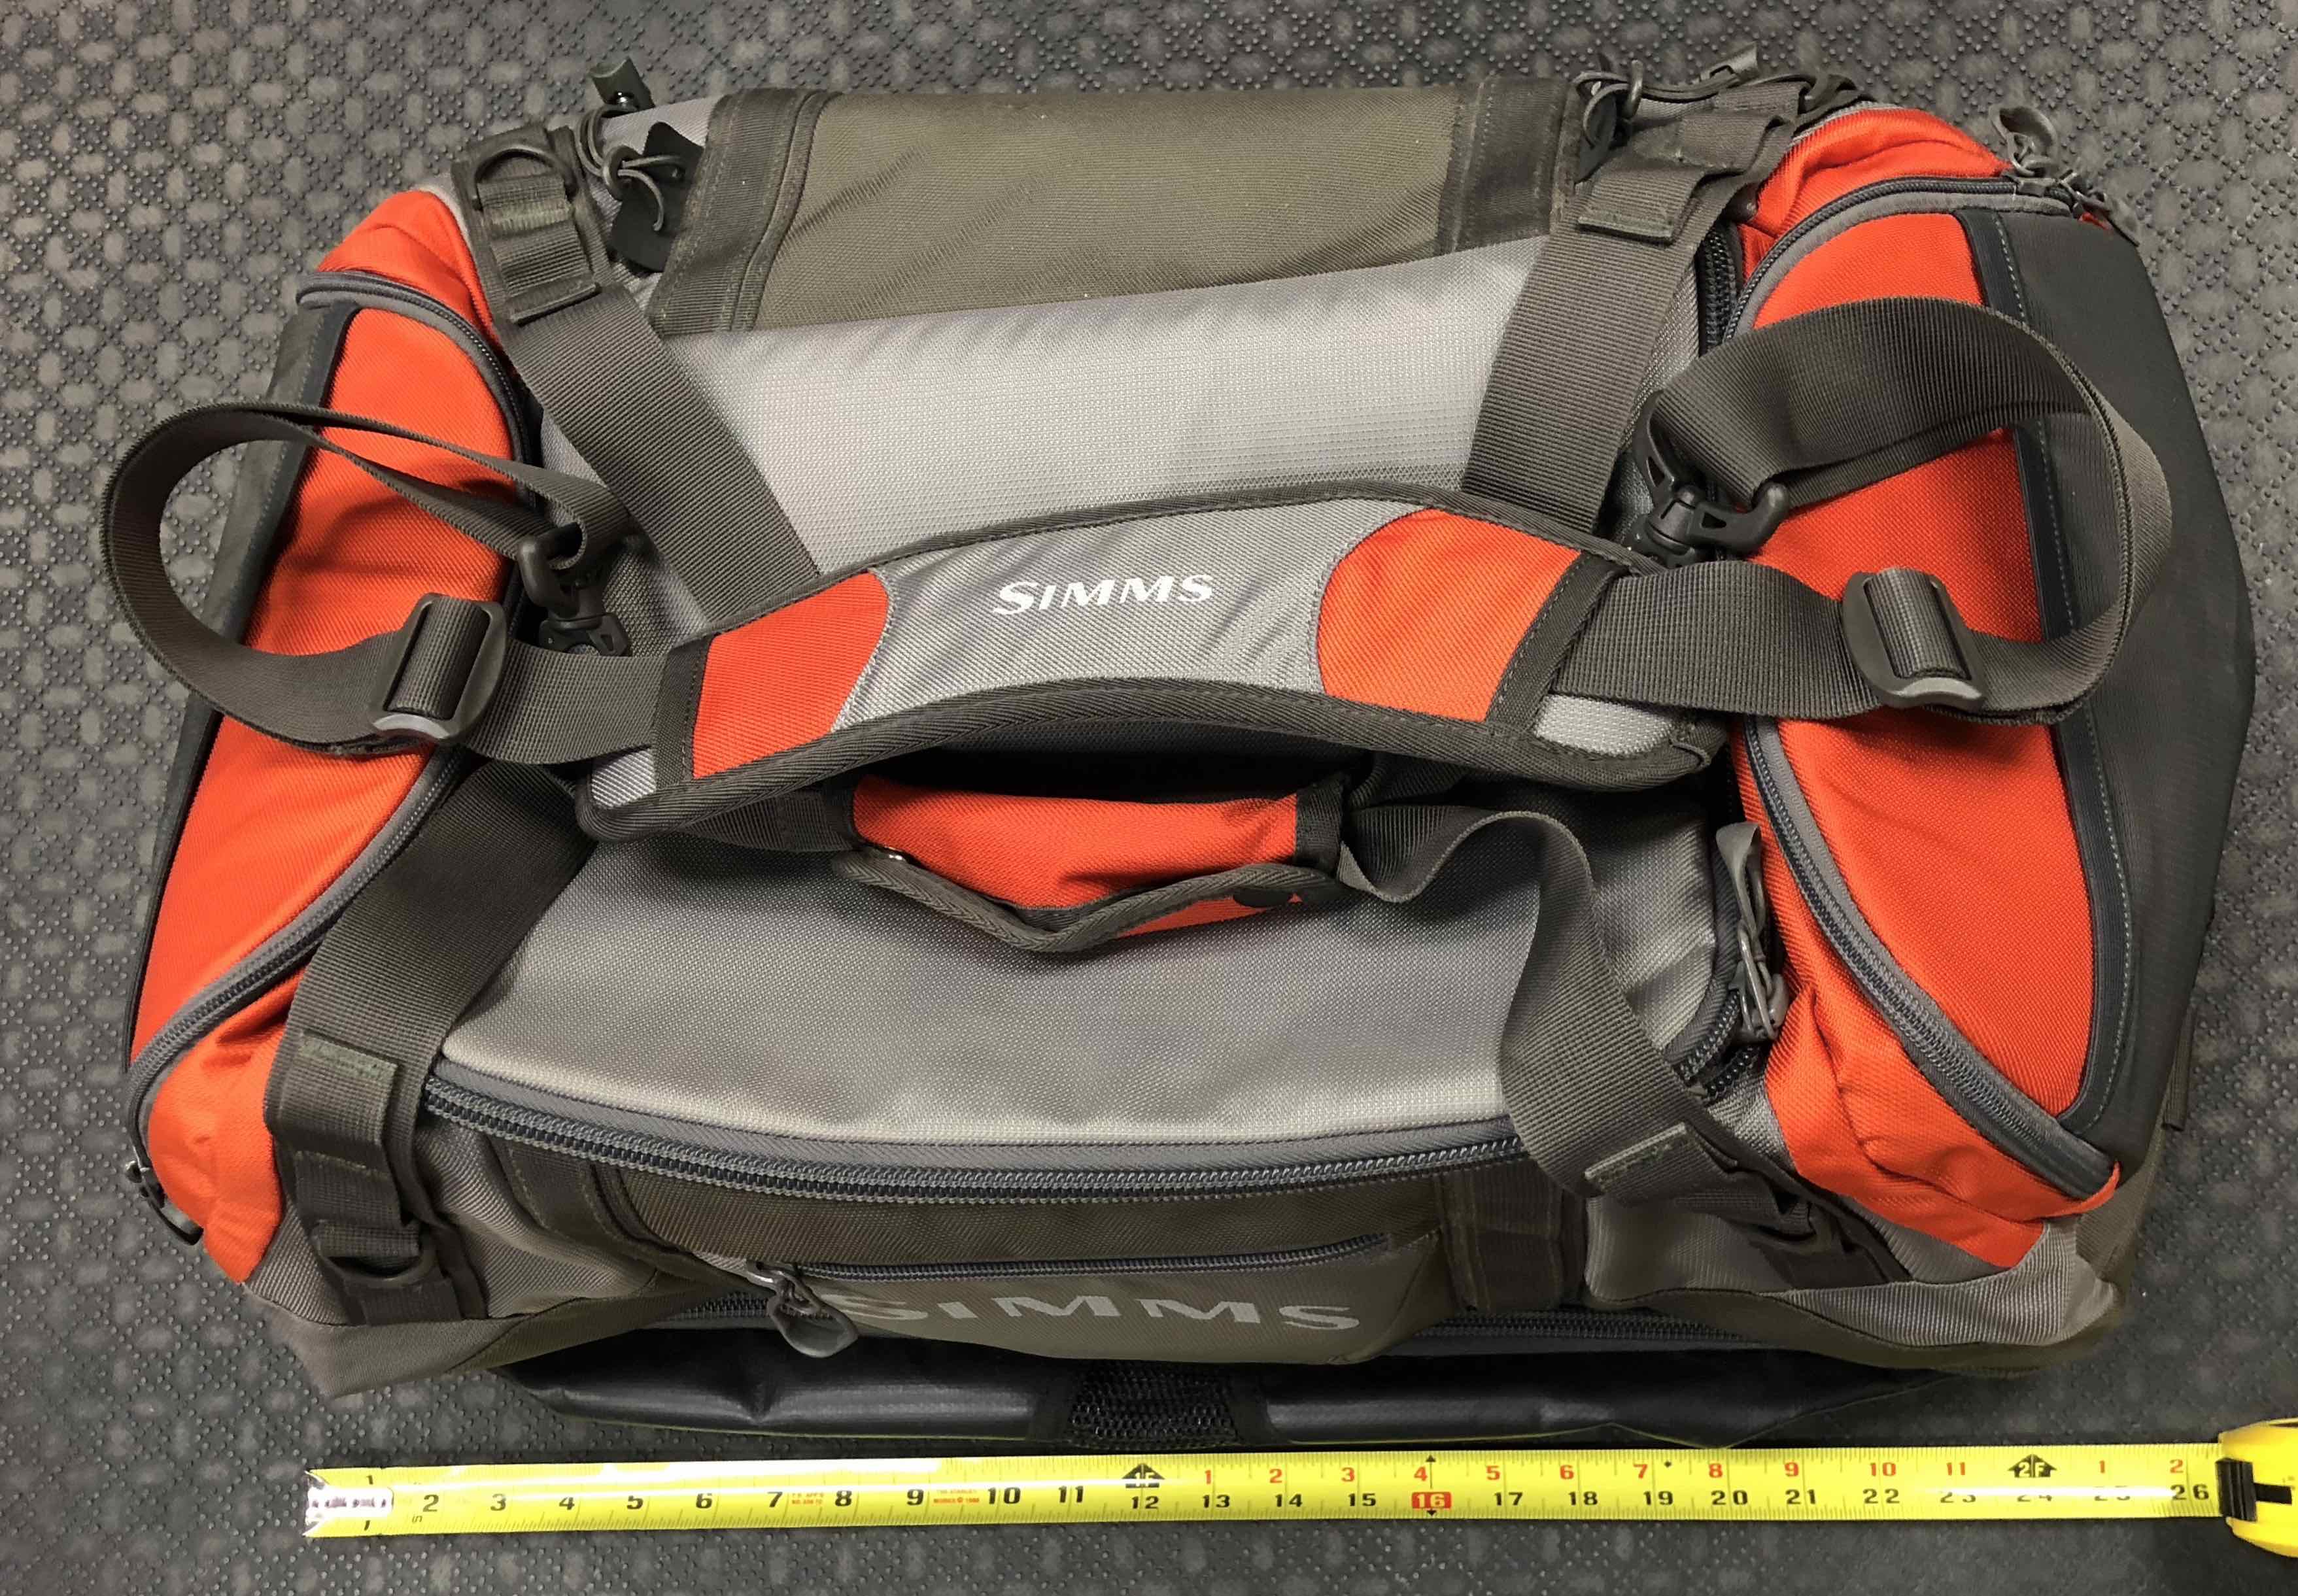 SOLD! – NEW PRICE! – Simms Headwaters Gear Bag – LIKE NEW! – $125